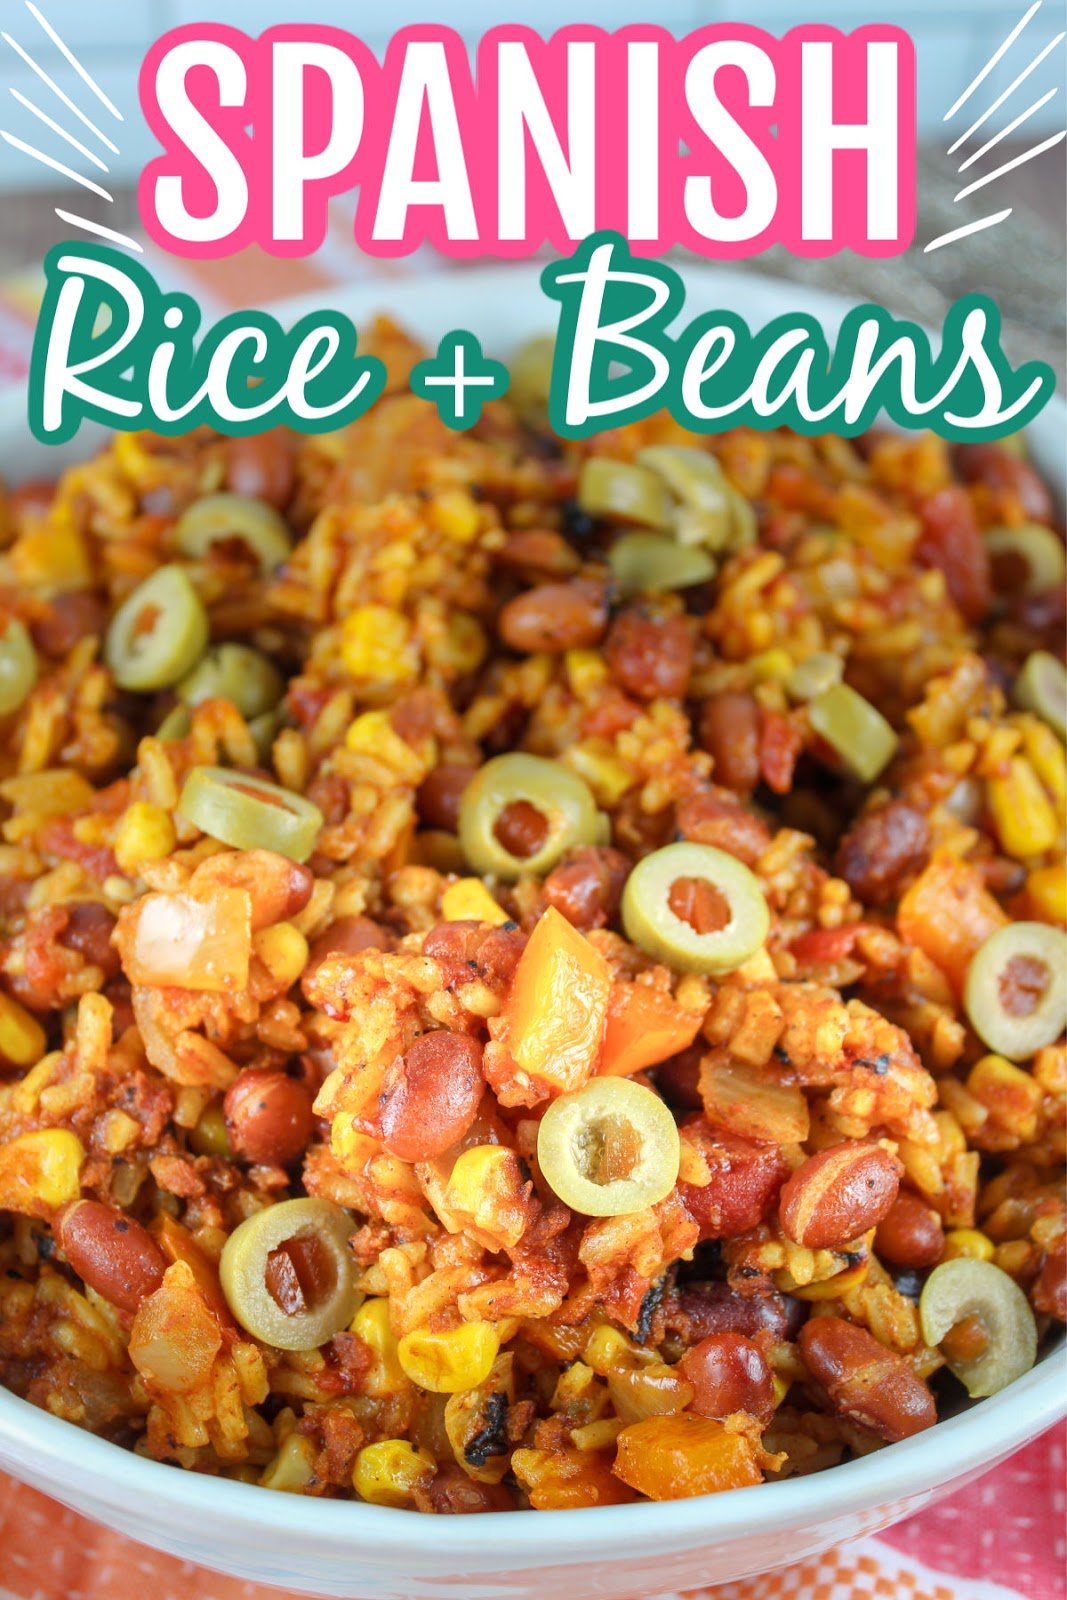 Spanish Rice and Beans is such a delicious meal and you can really customize it to your family’s tastes. I love mine with peppers, onions and lots of flavor! (garlic, cumin, paprika and more!)
 via @foodhussy